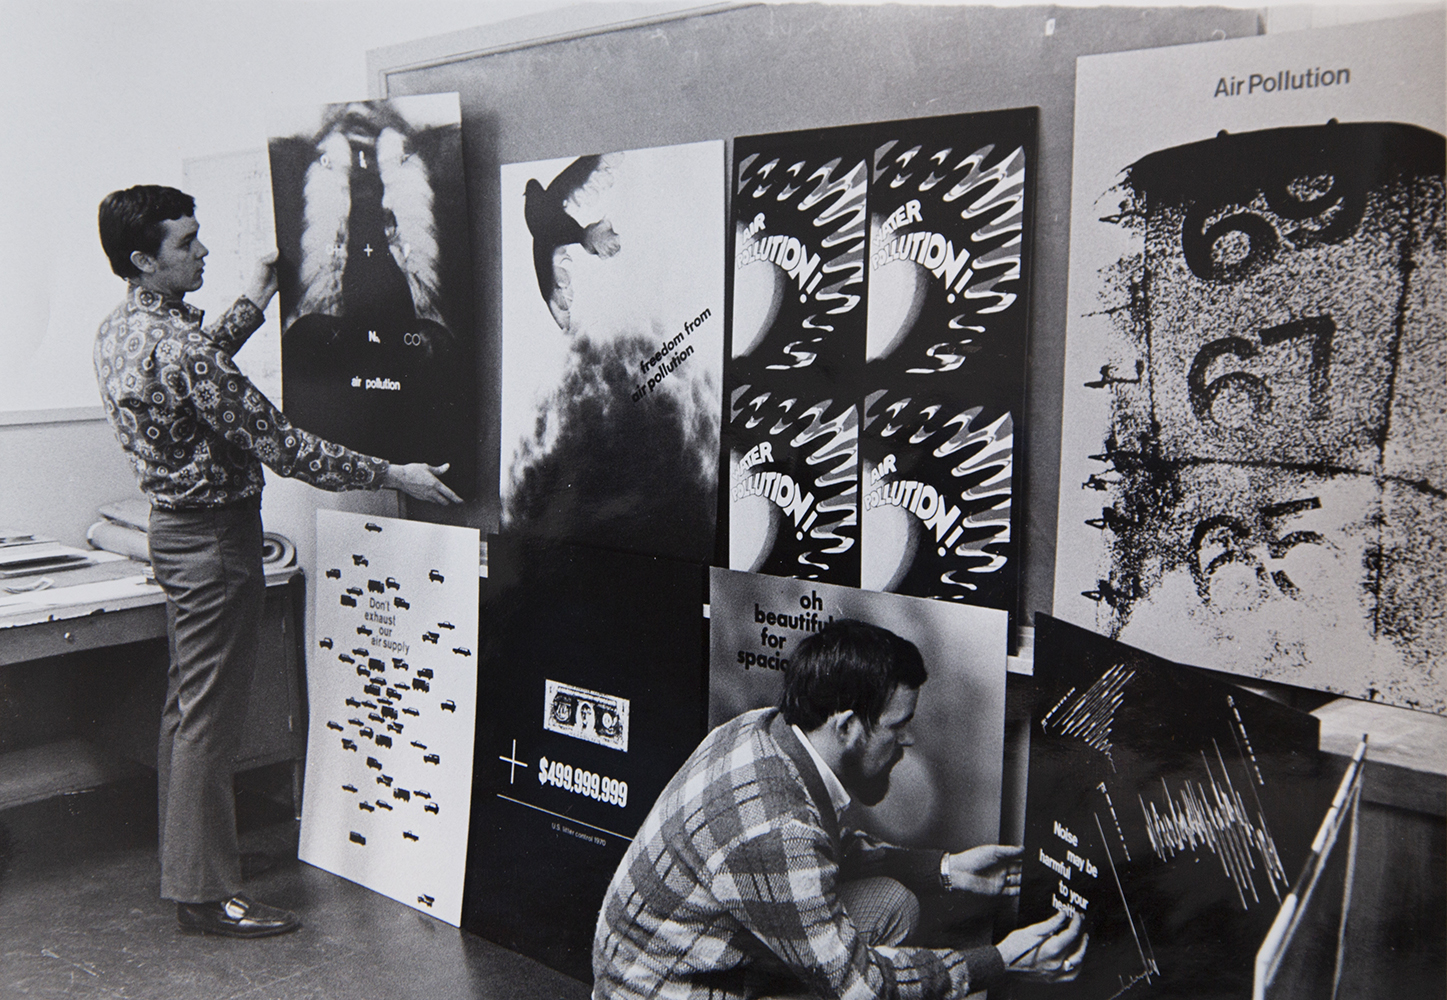 Graphic design students display their anti-pollution poster designs, 1970. University of Utah Archival Photograph Collection P0305, D – Art 1970-1979, Folder 1, No. 3. Special Collections, J. Willard Marriott Library, the University of Utah.    